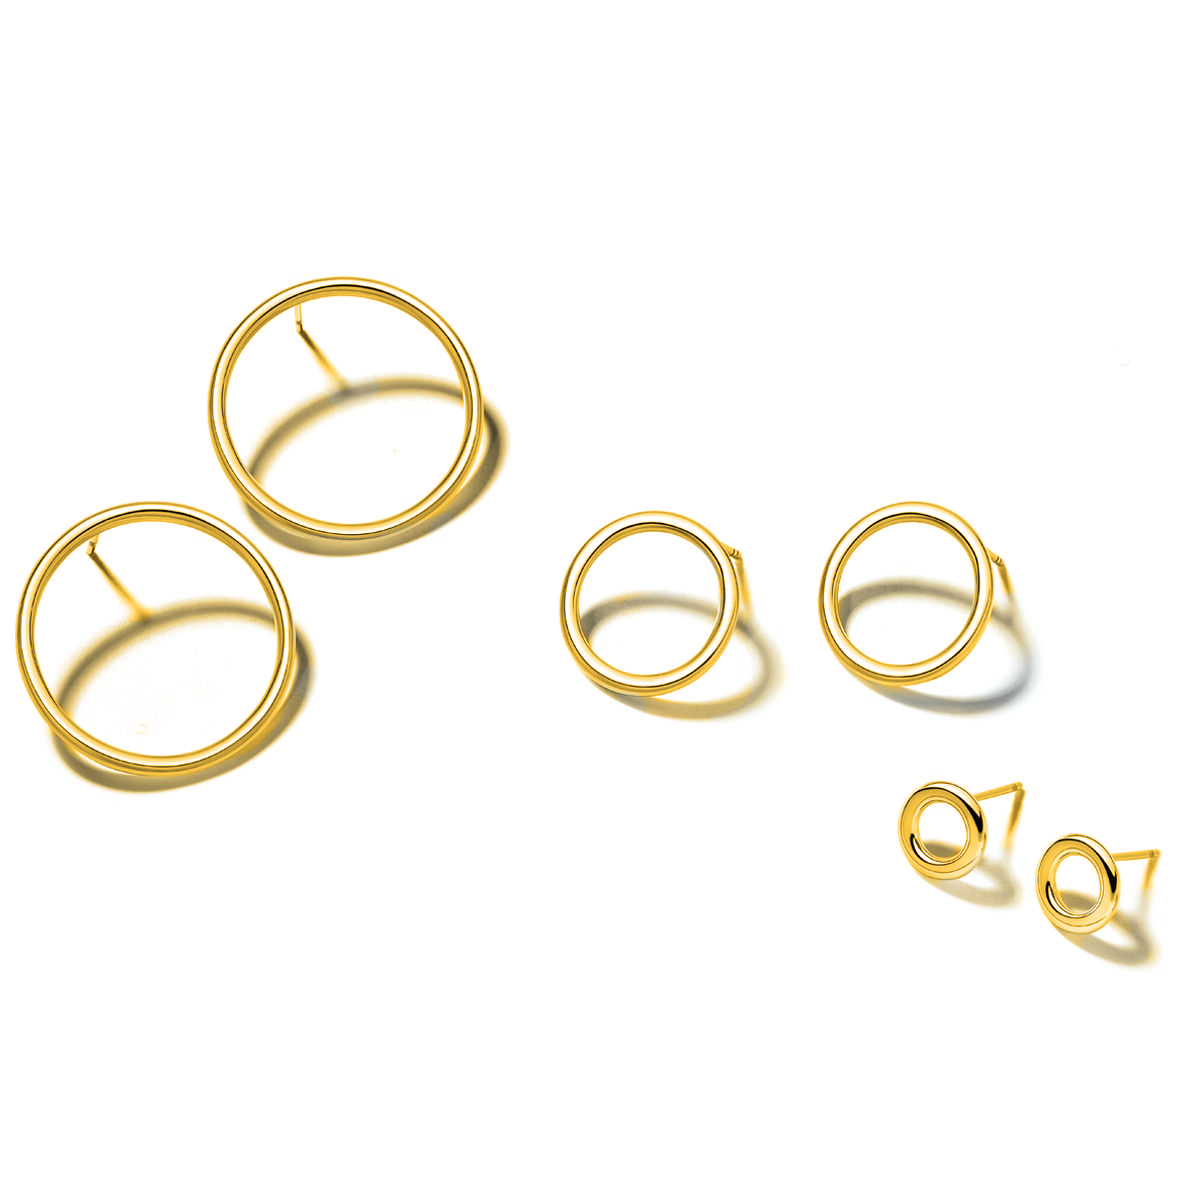 Front Facing Gold Plated Hoop Earrings | Hersey & Son Silversmiths